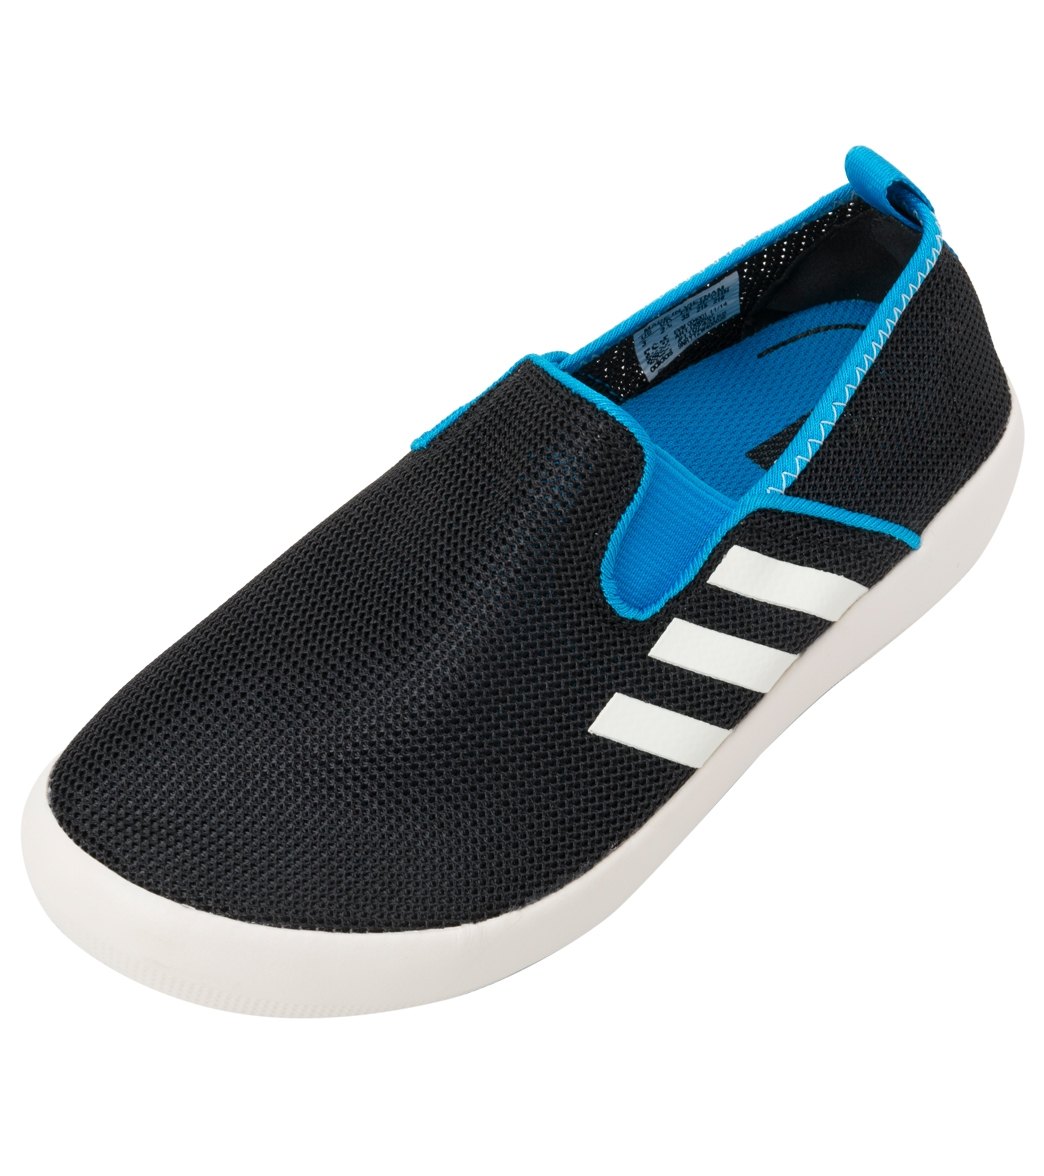 adidas kids water shoes